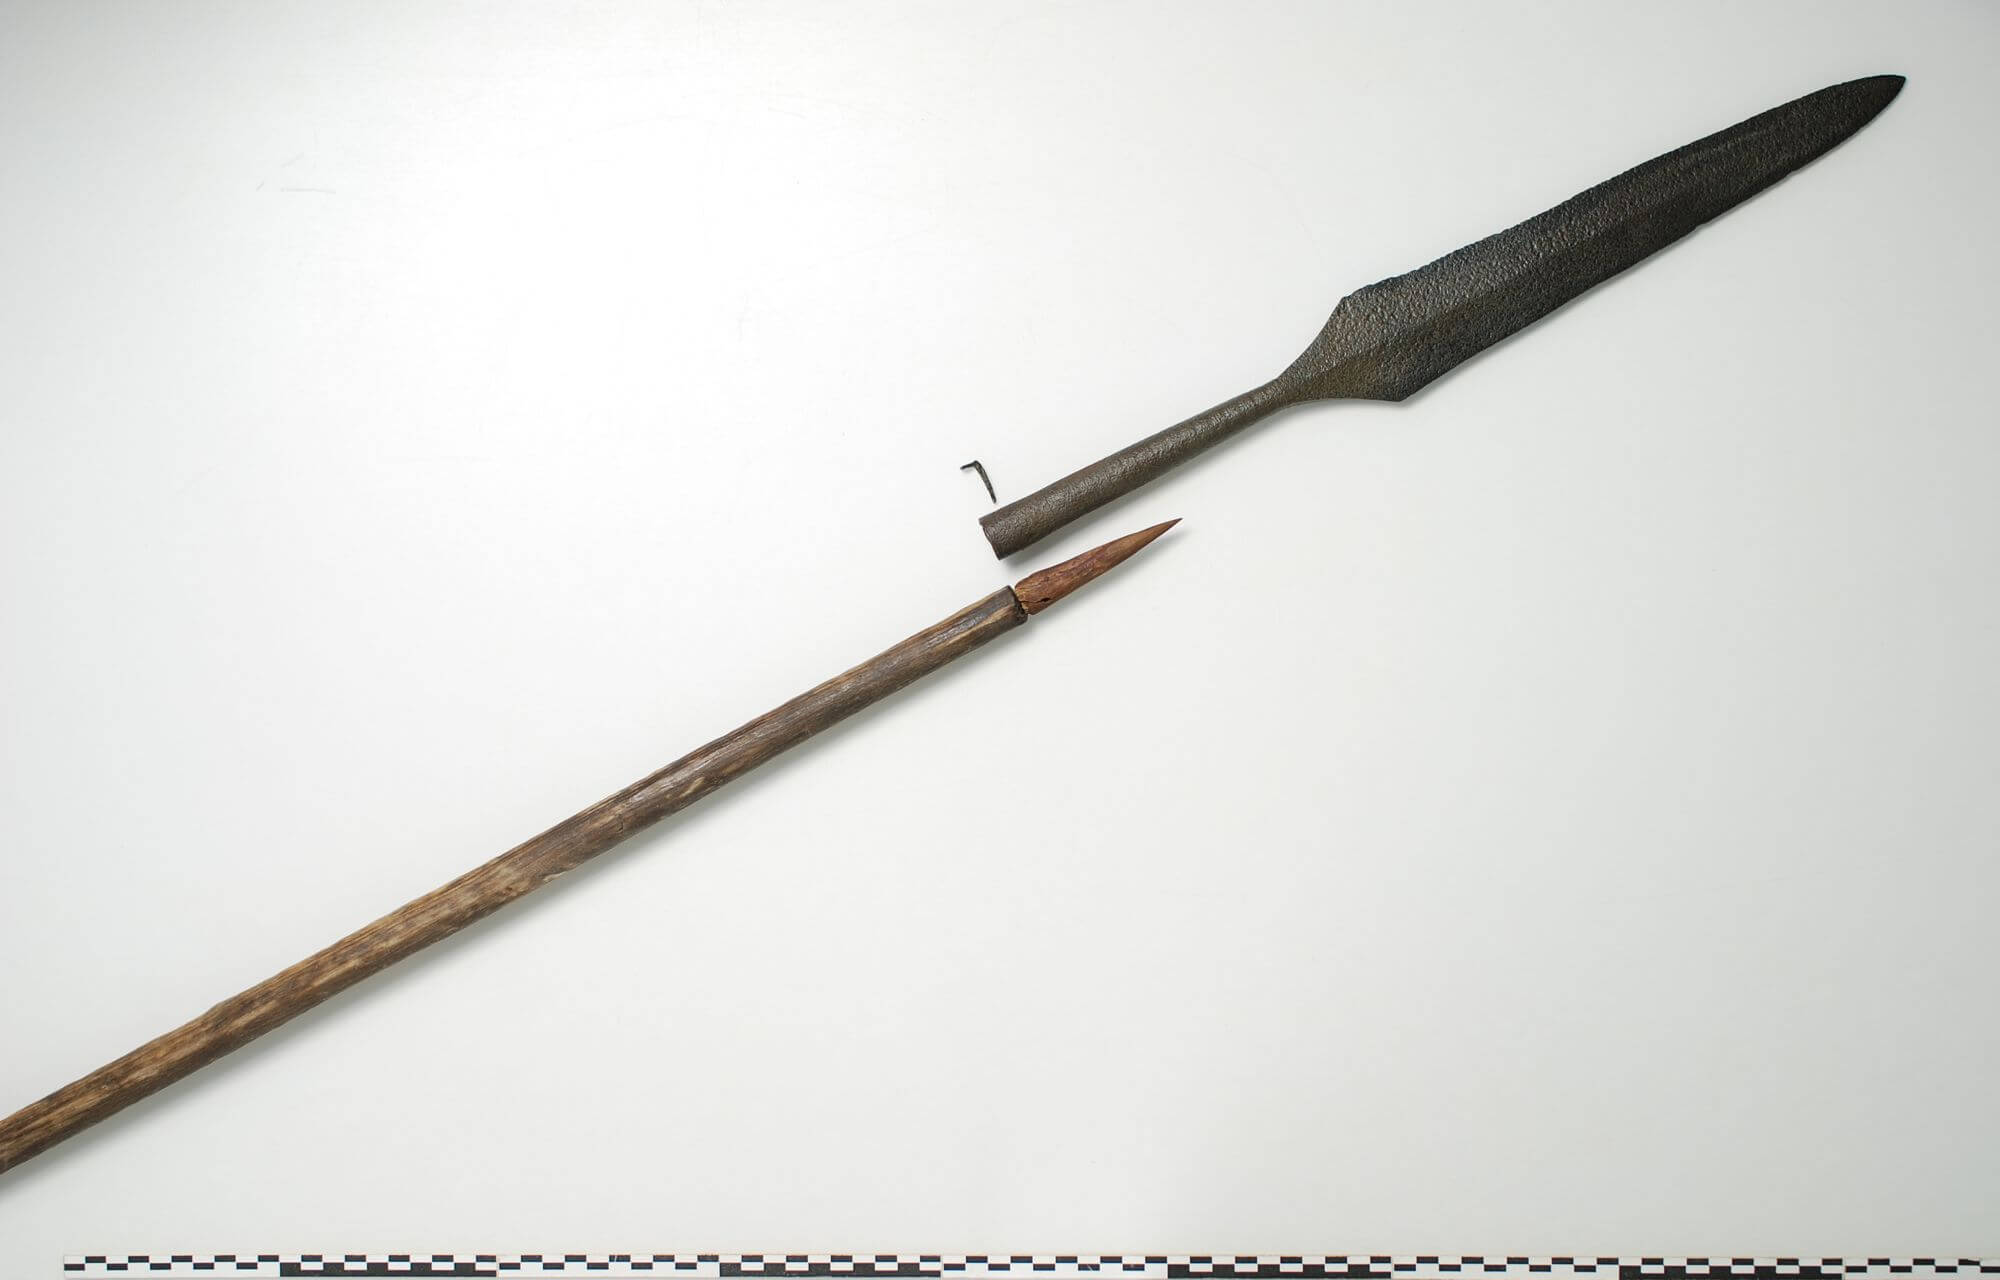 The Viking Spear from the Lendbreen Ice Patch - Secrets of the Ice